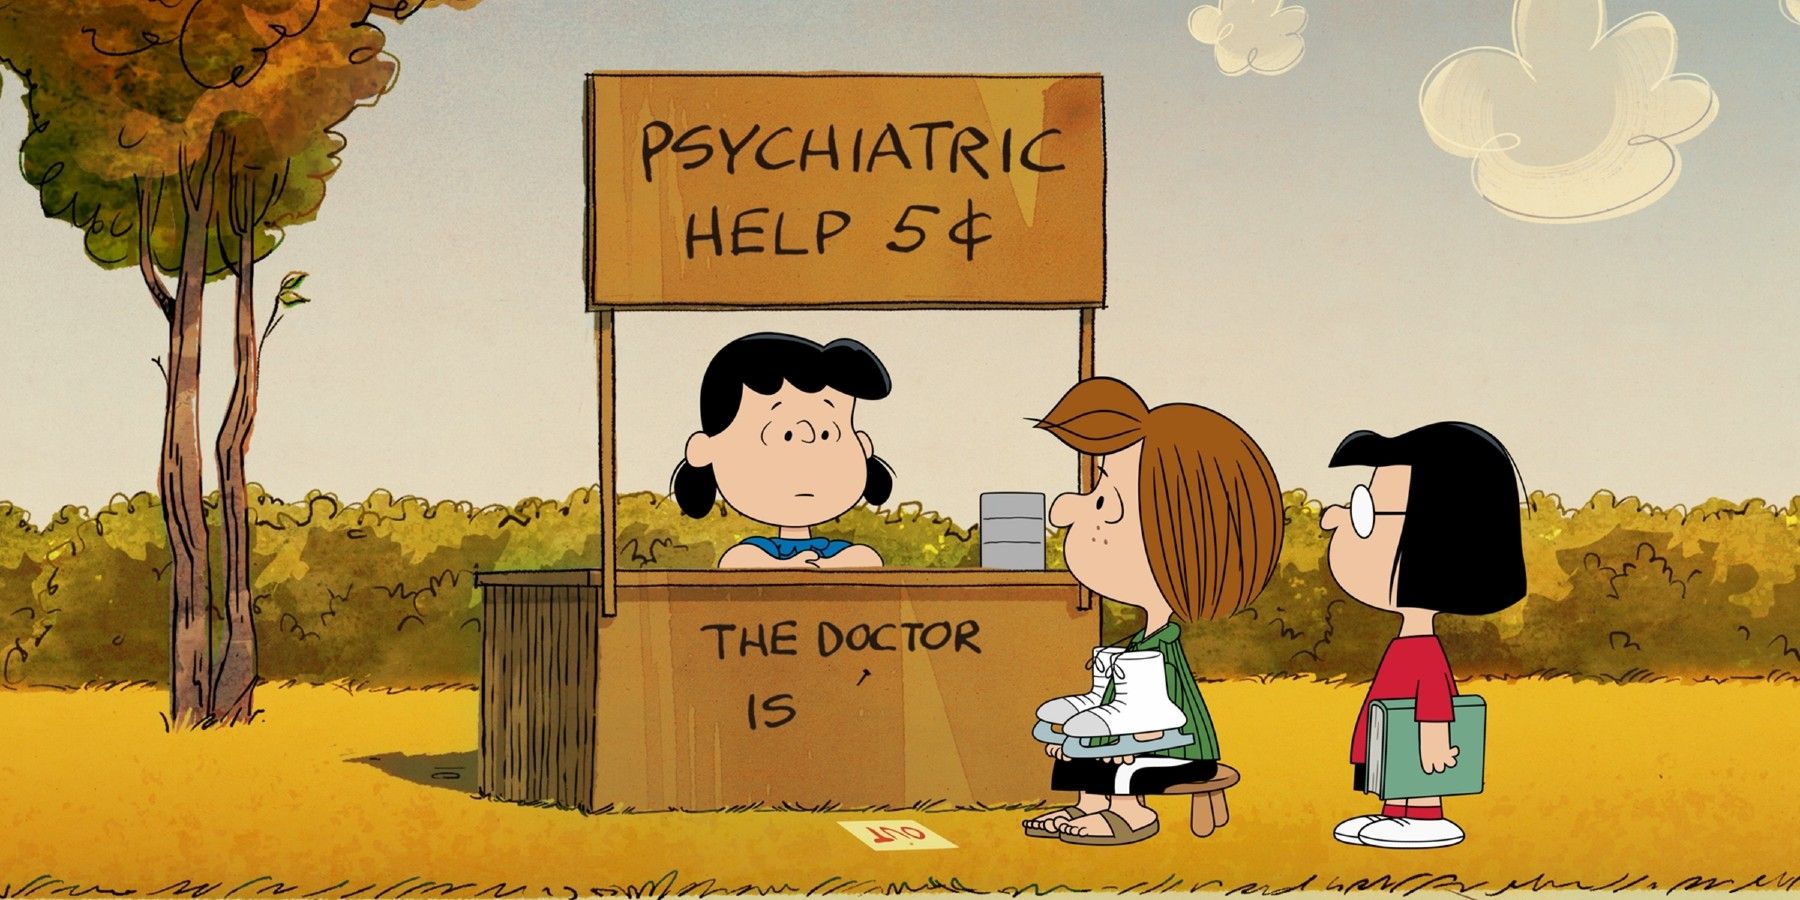 valheim-player-recreates-lucy-s-psychiatric-booth-from-charlie-brown